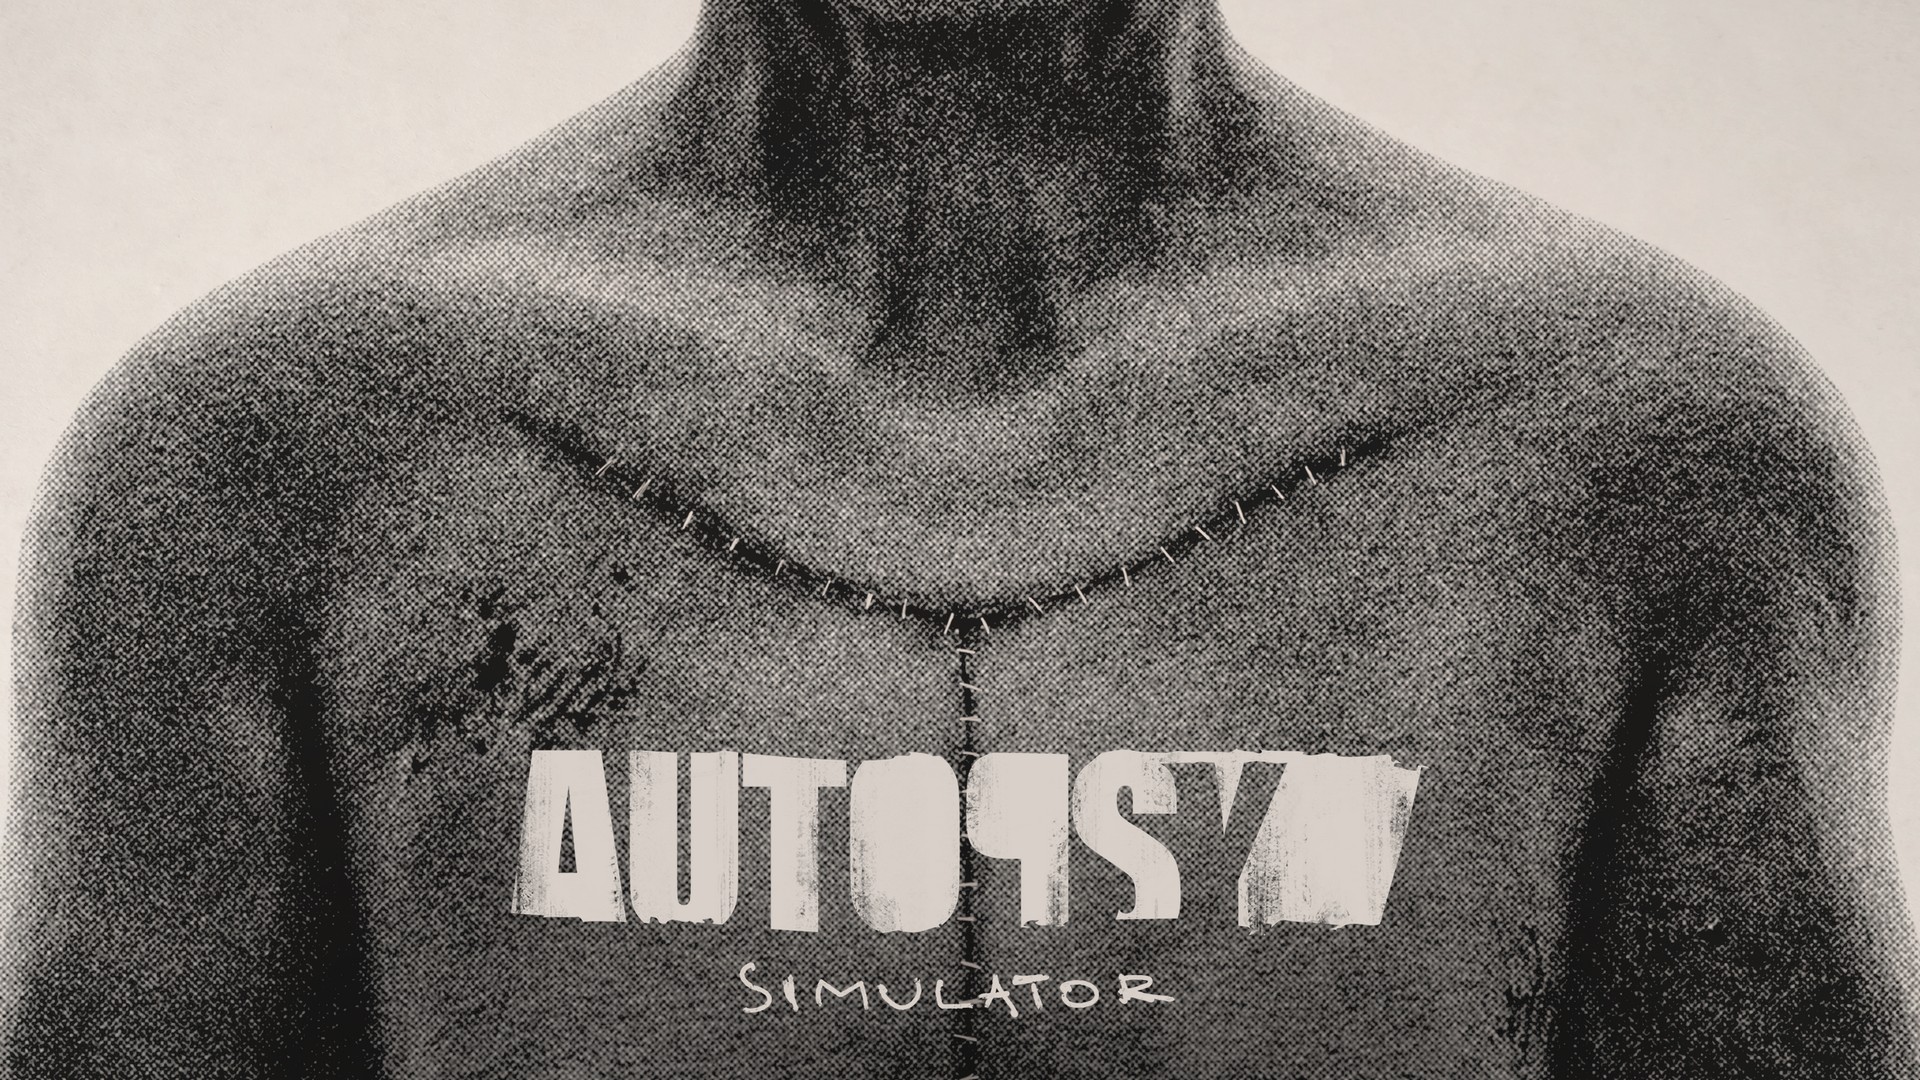 Autopsy Simulator Reveals A Terrifying New Gameplay Trailer – Launches 9th May